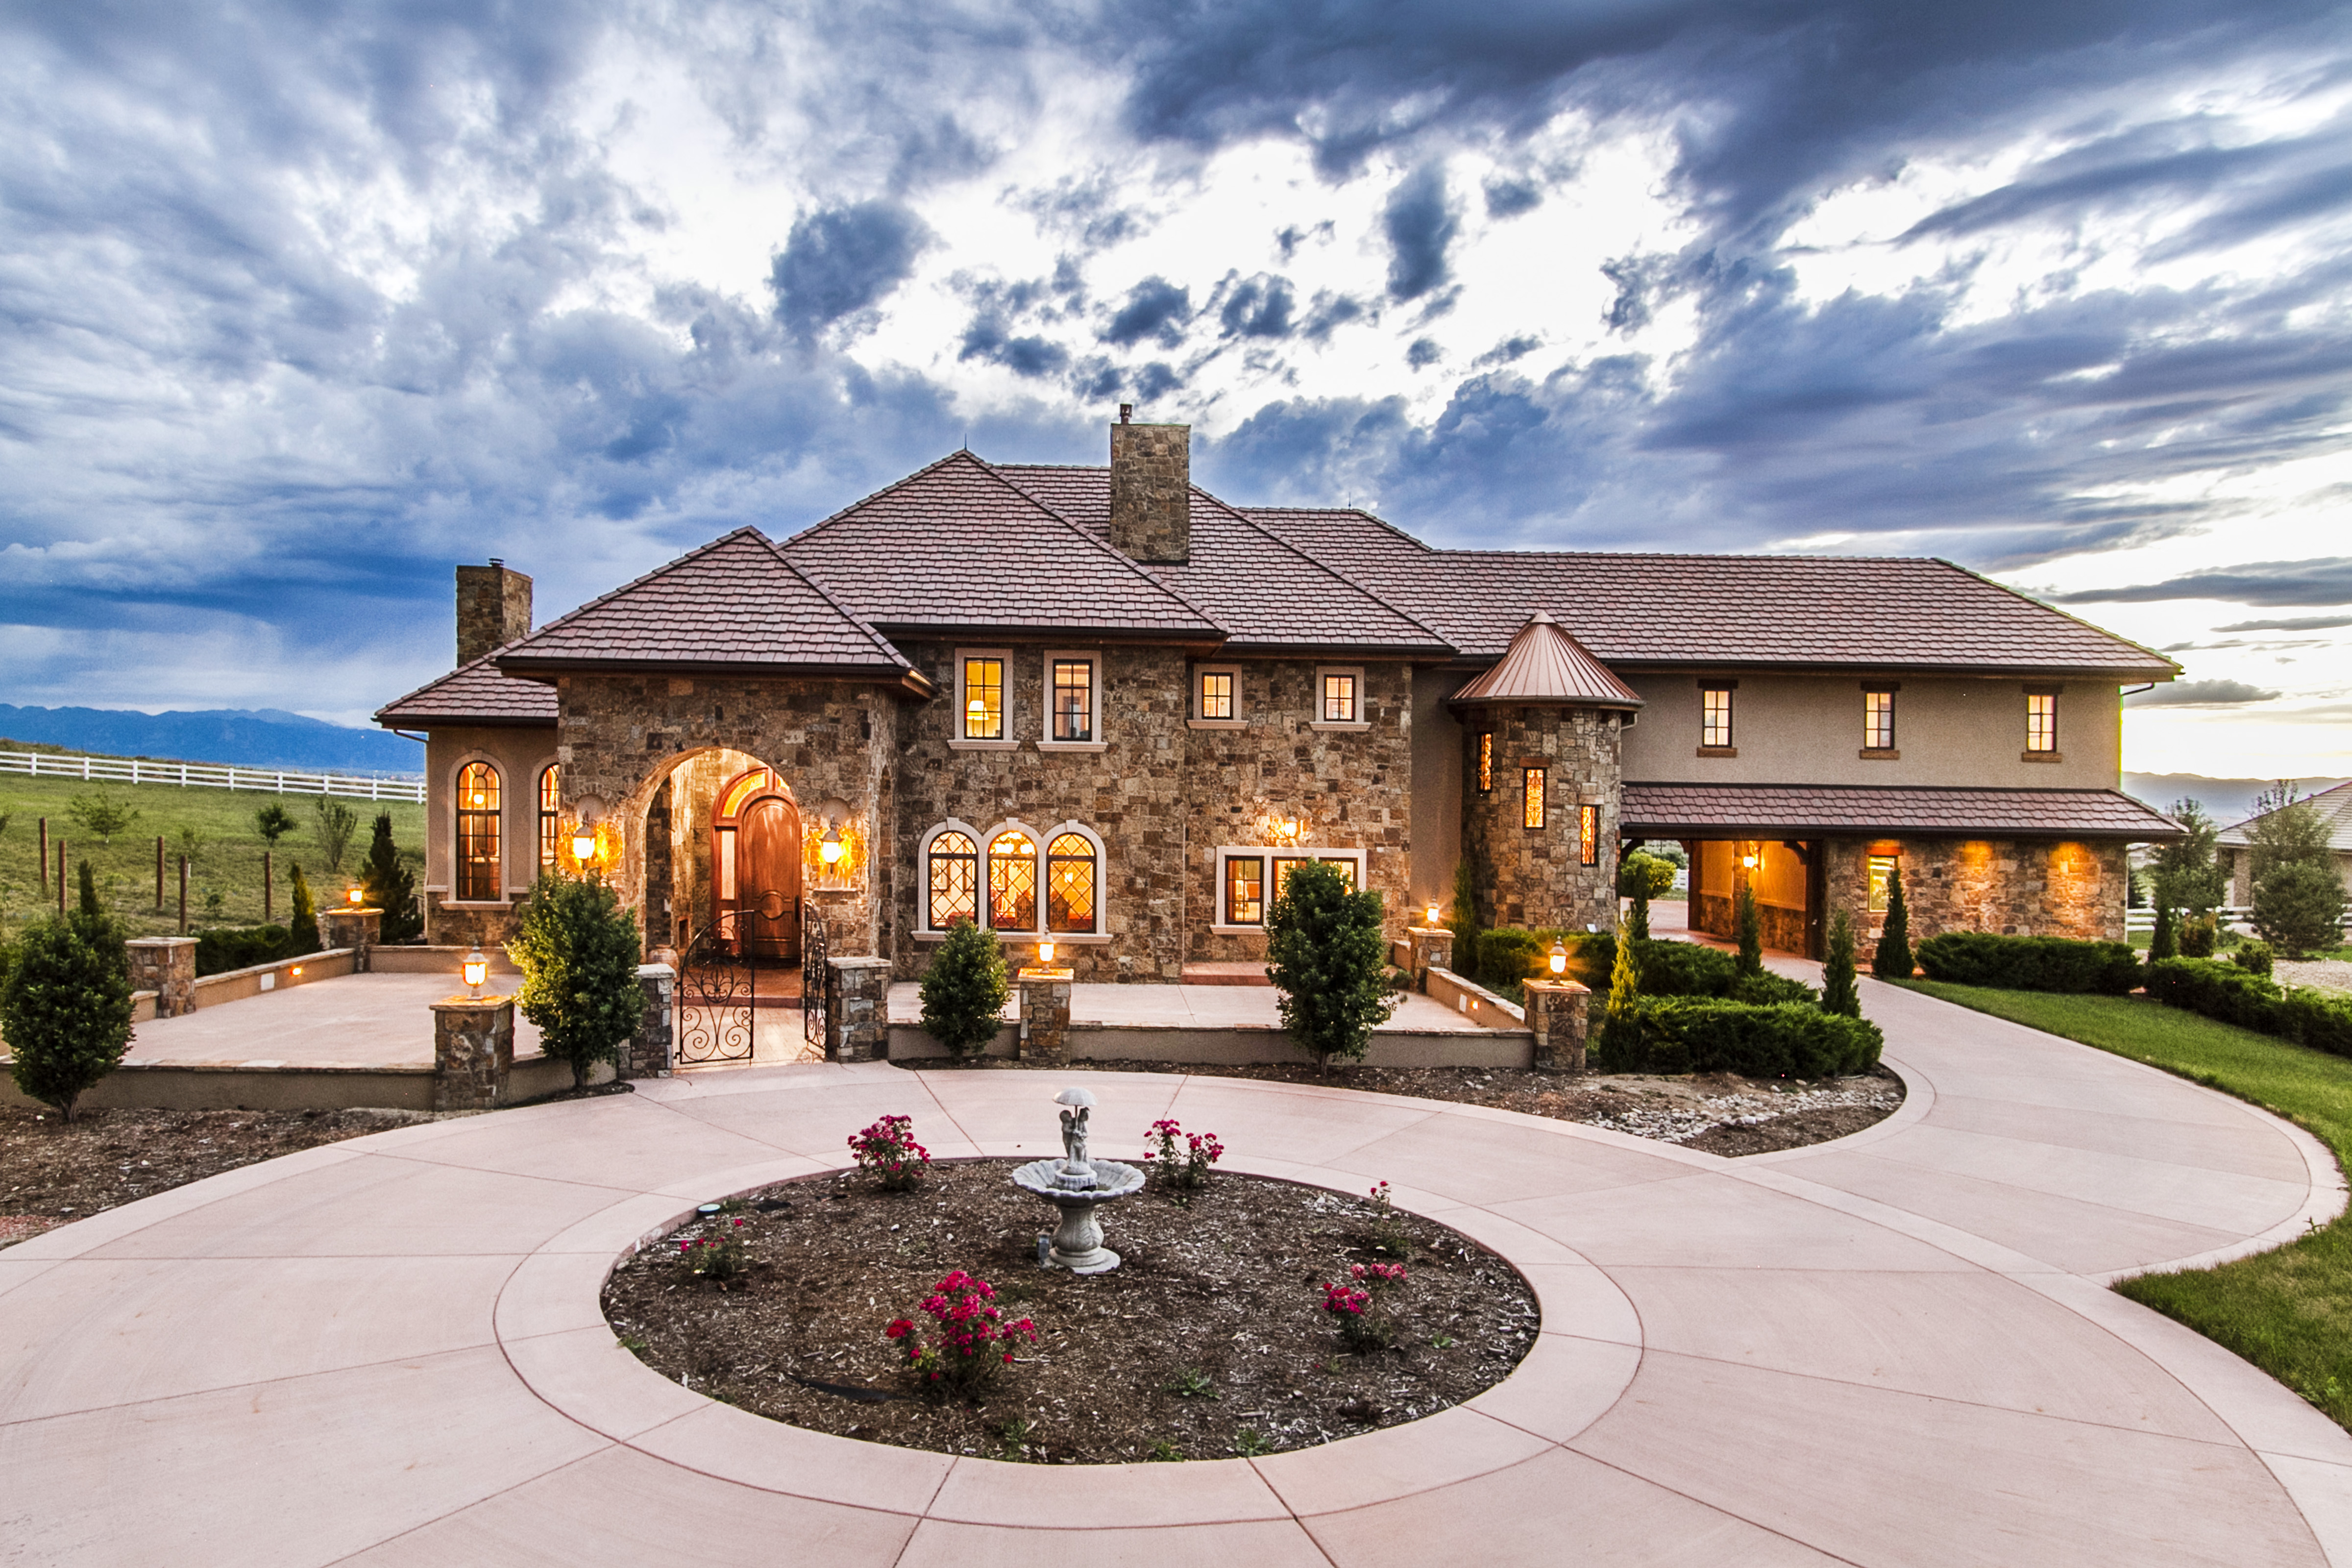 15468 Mountain View Circle, Broomfield CO. Listed by LIV Sotheby's International Realty for $2.65M.